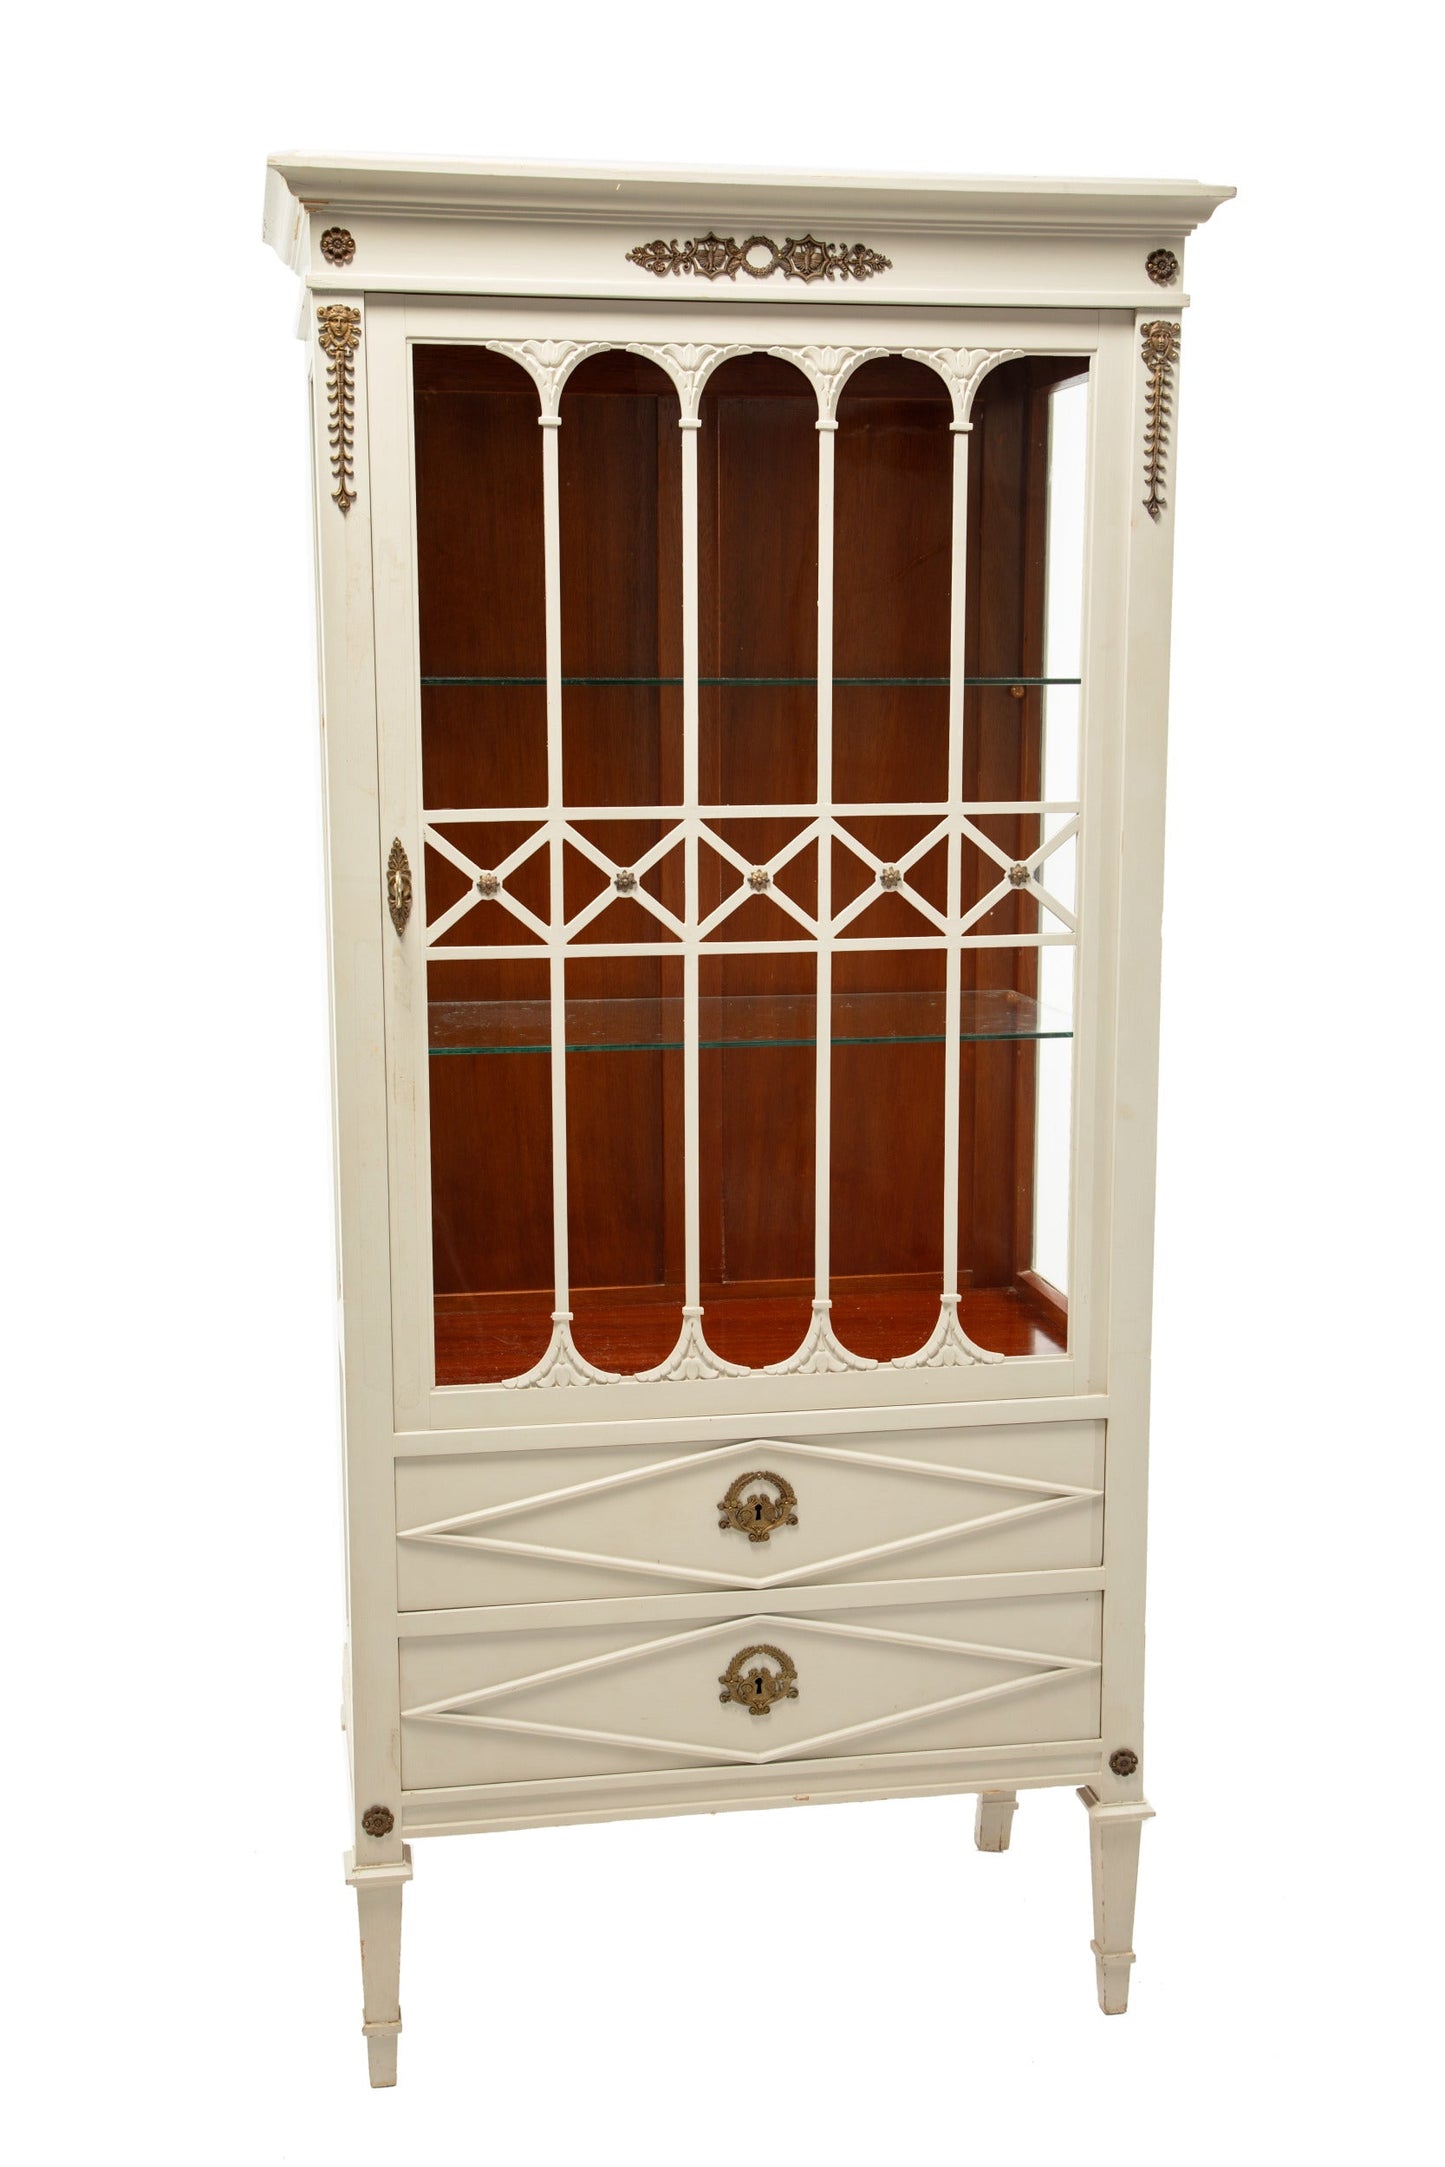 Ivory lacquered display cabinet with 1 door from the 1950s